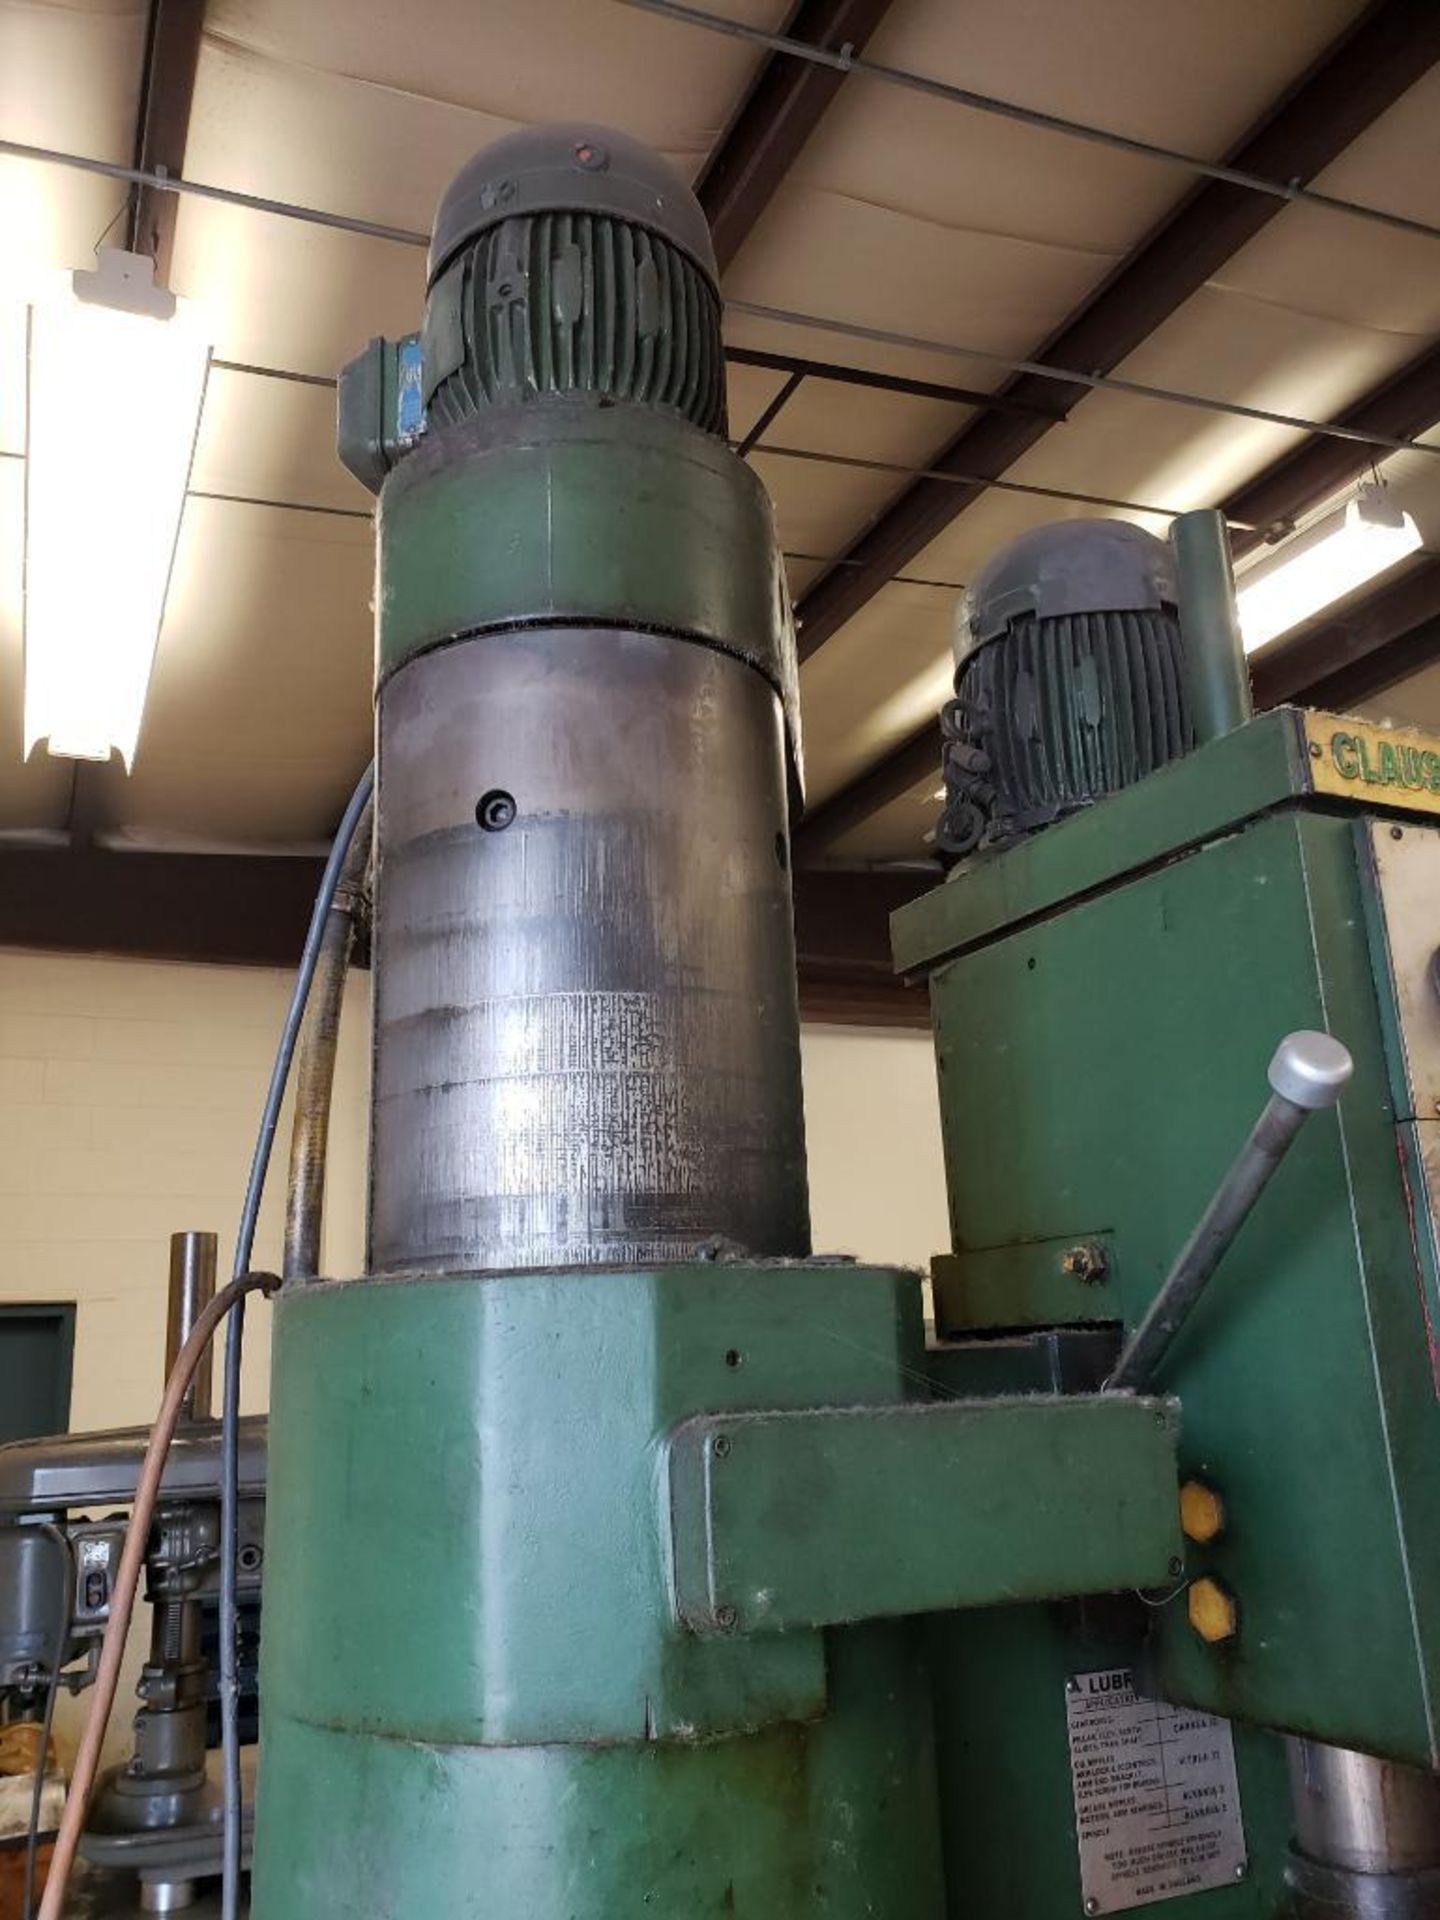 Clausing Colchester radial drill press. NO markings on drill for size. Appears to be 4ft x 12in. - Image 4 of 14